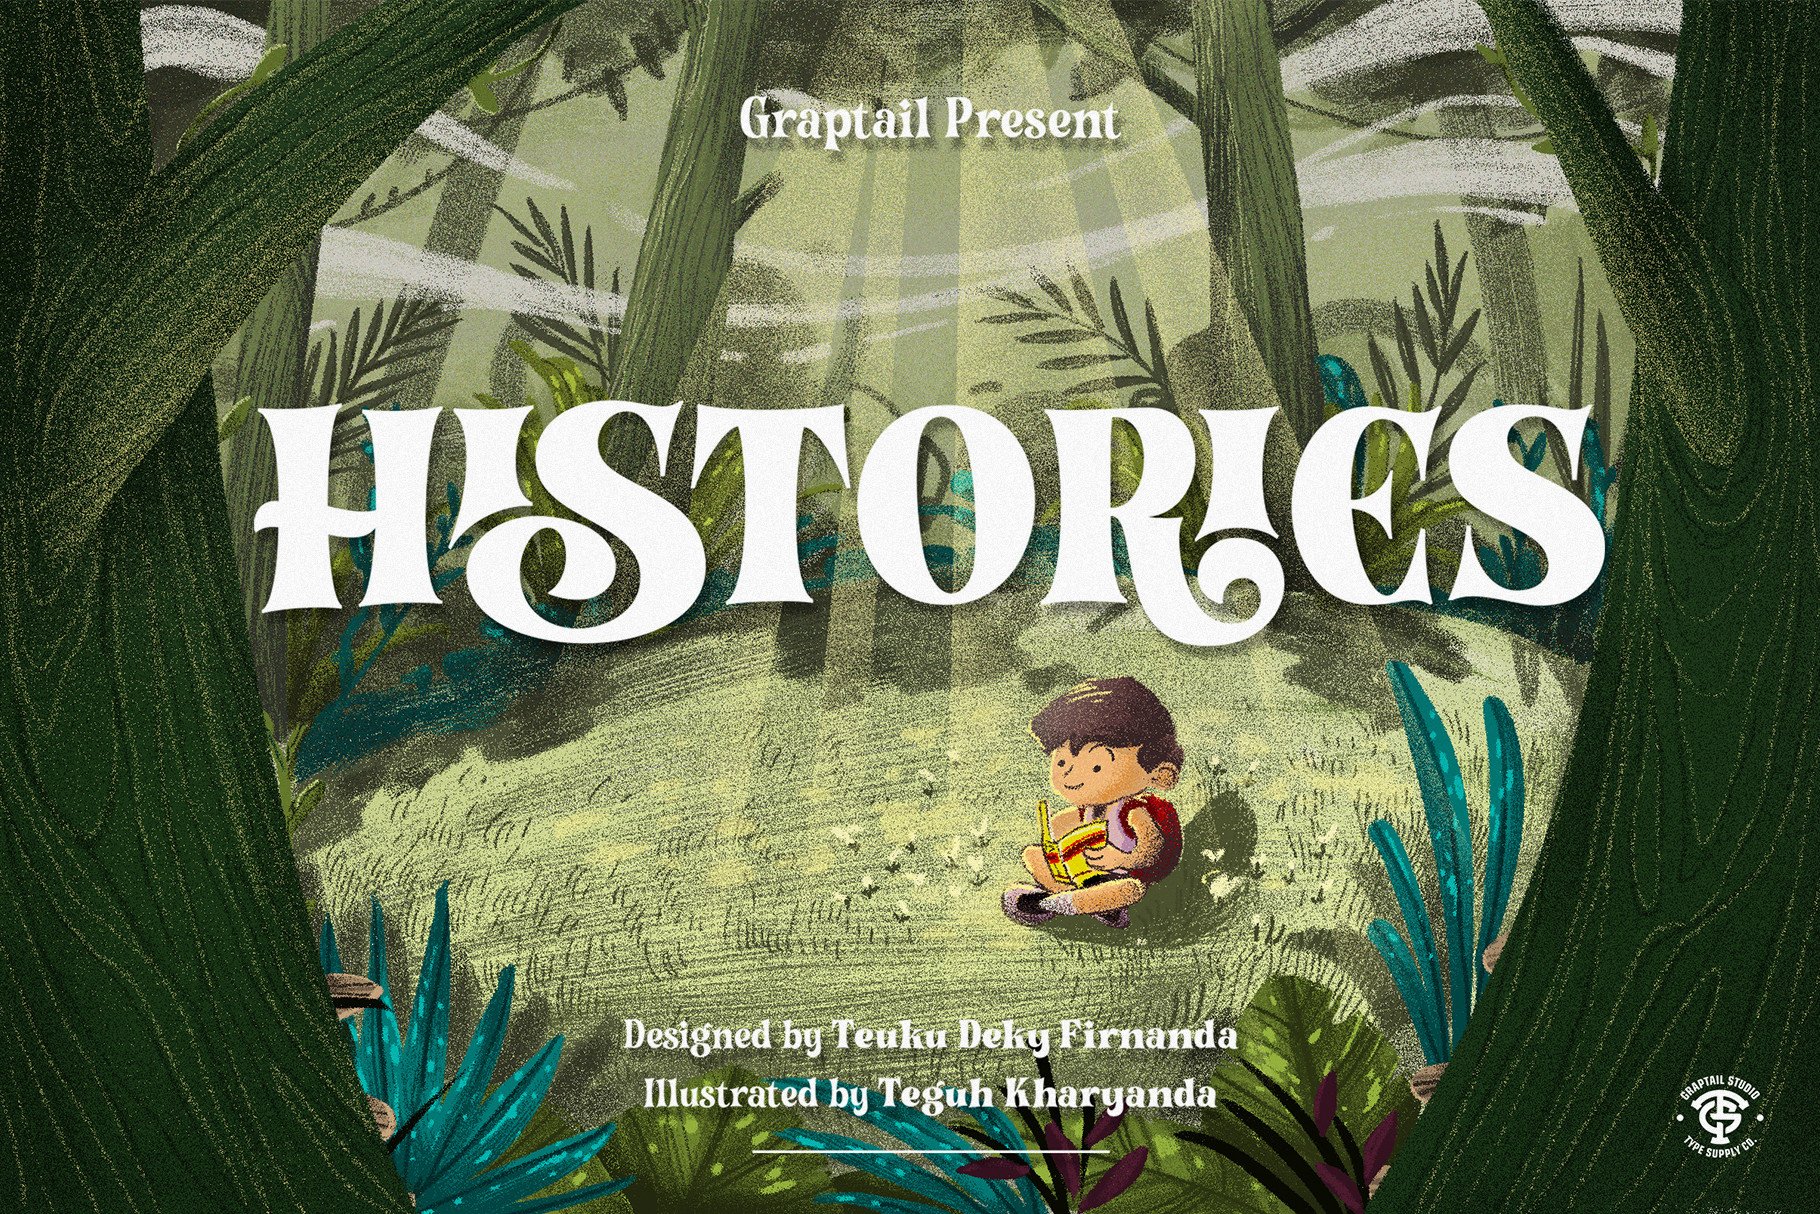 Histories - Fairytale Typeface cover image.